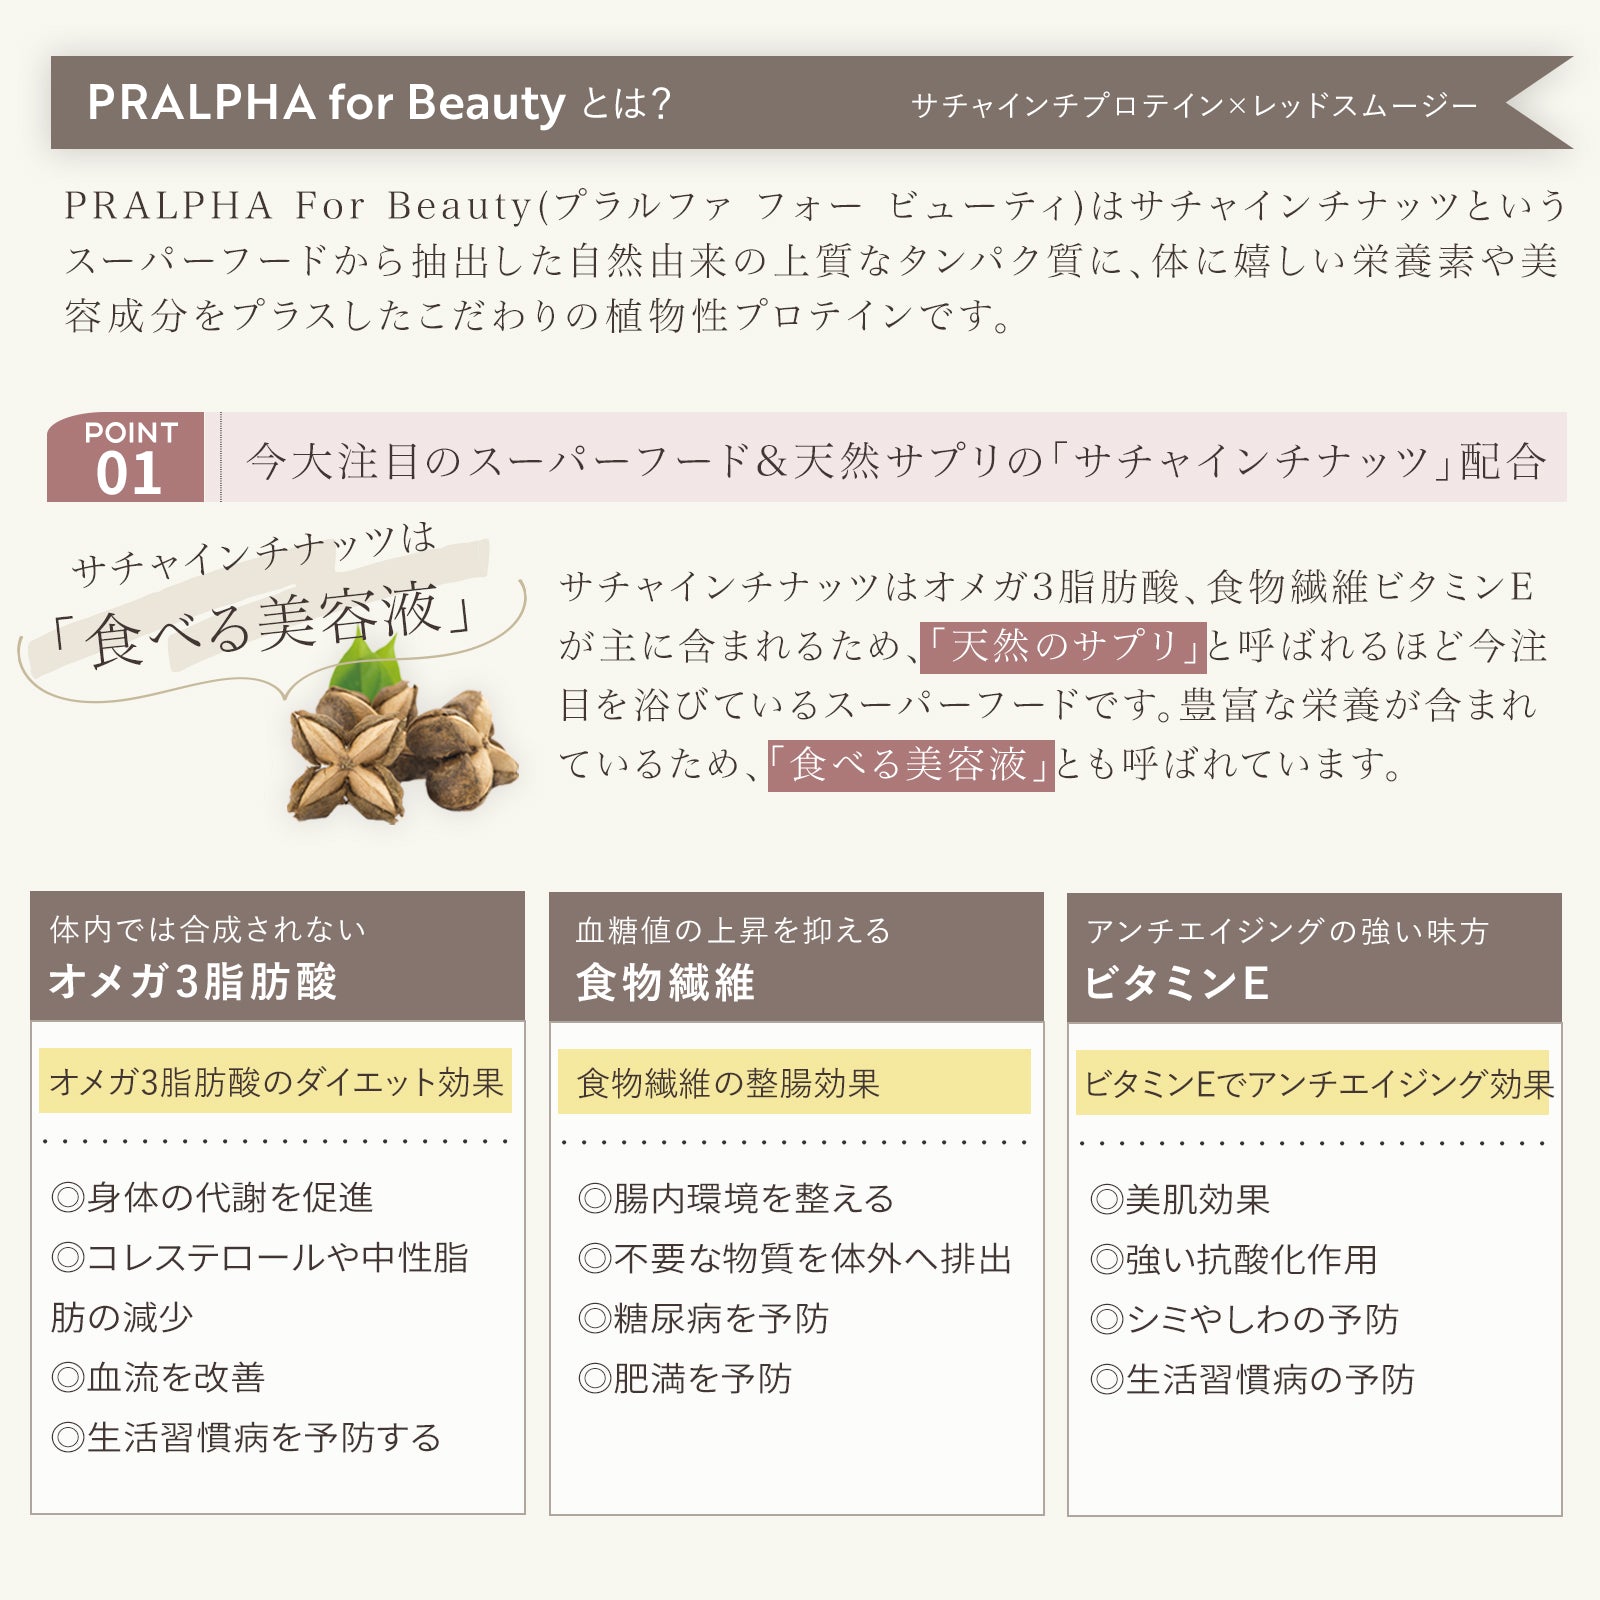 PRALPHA for Beauty